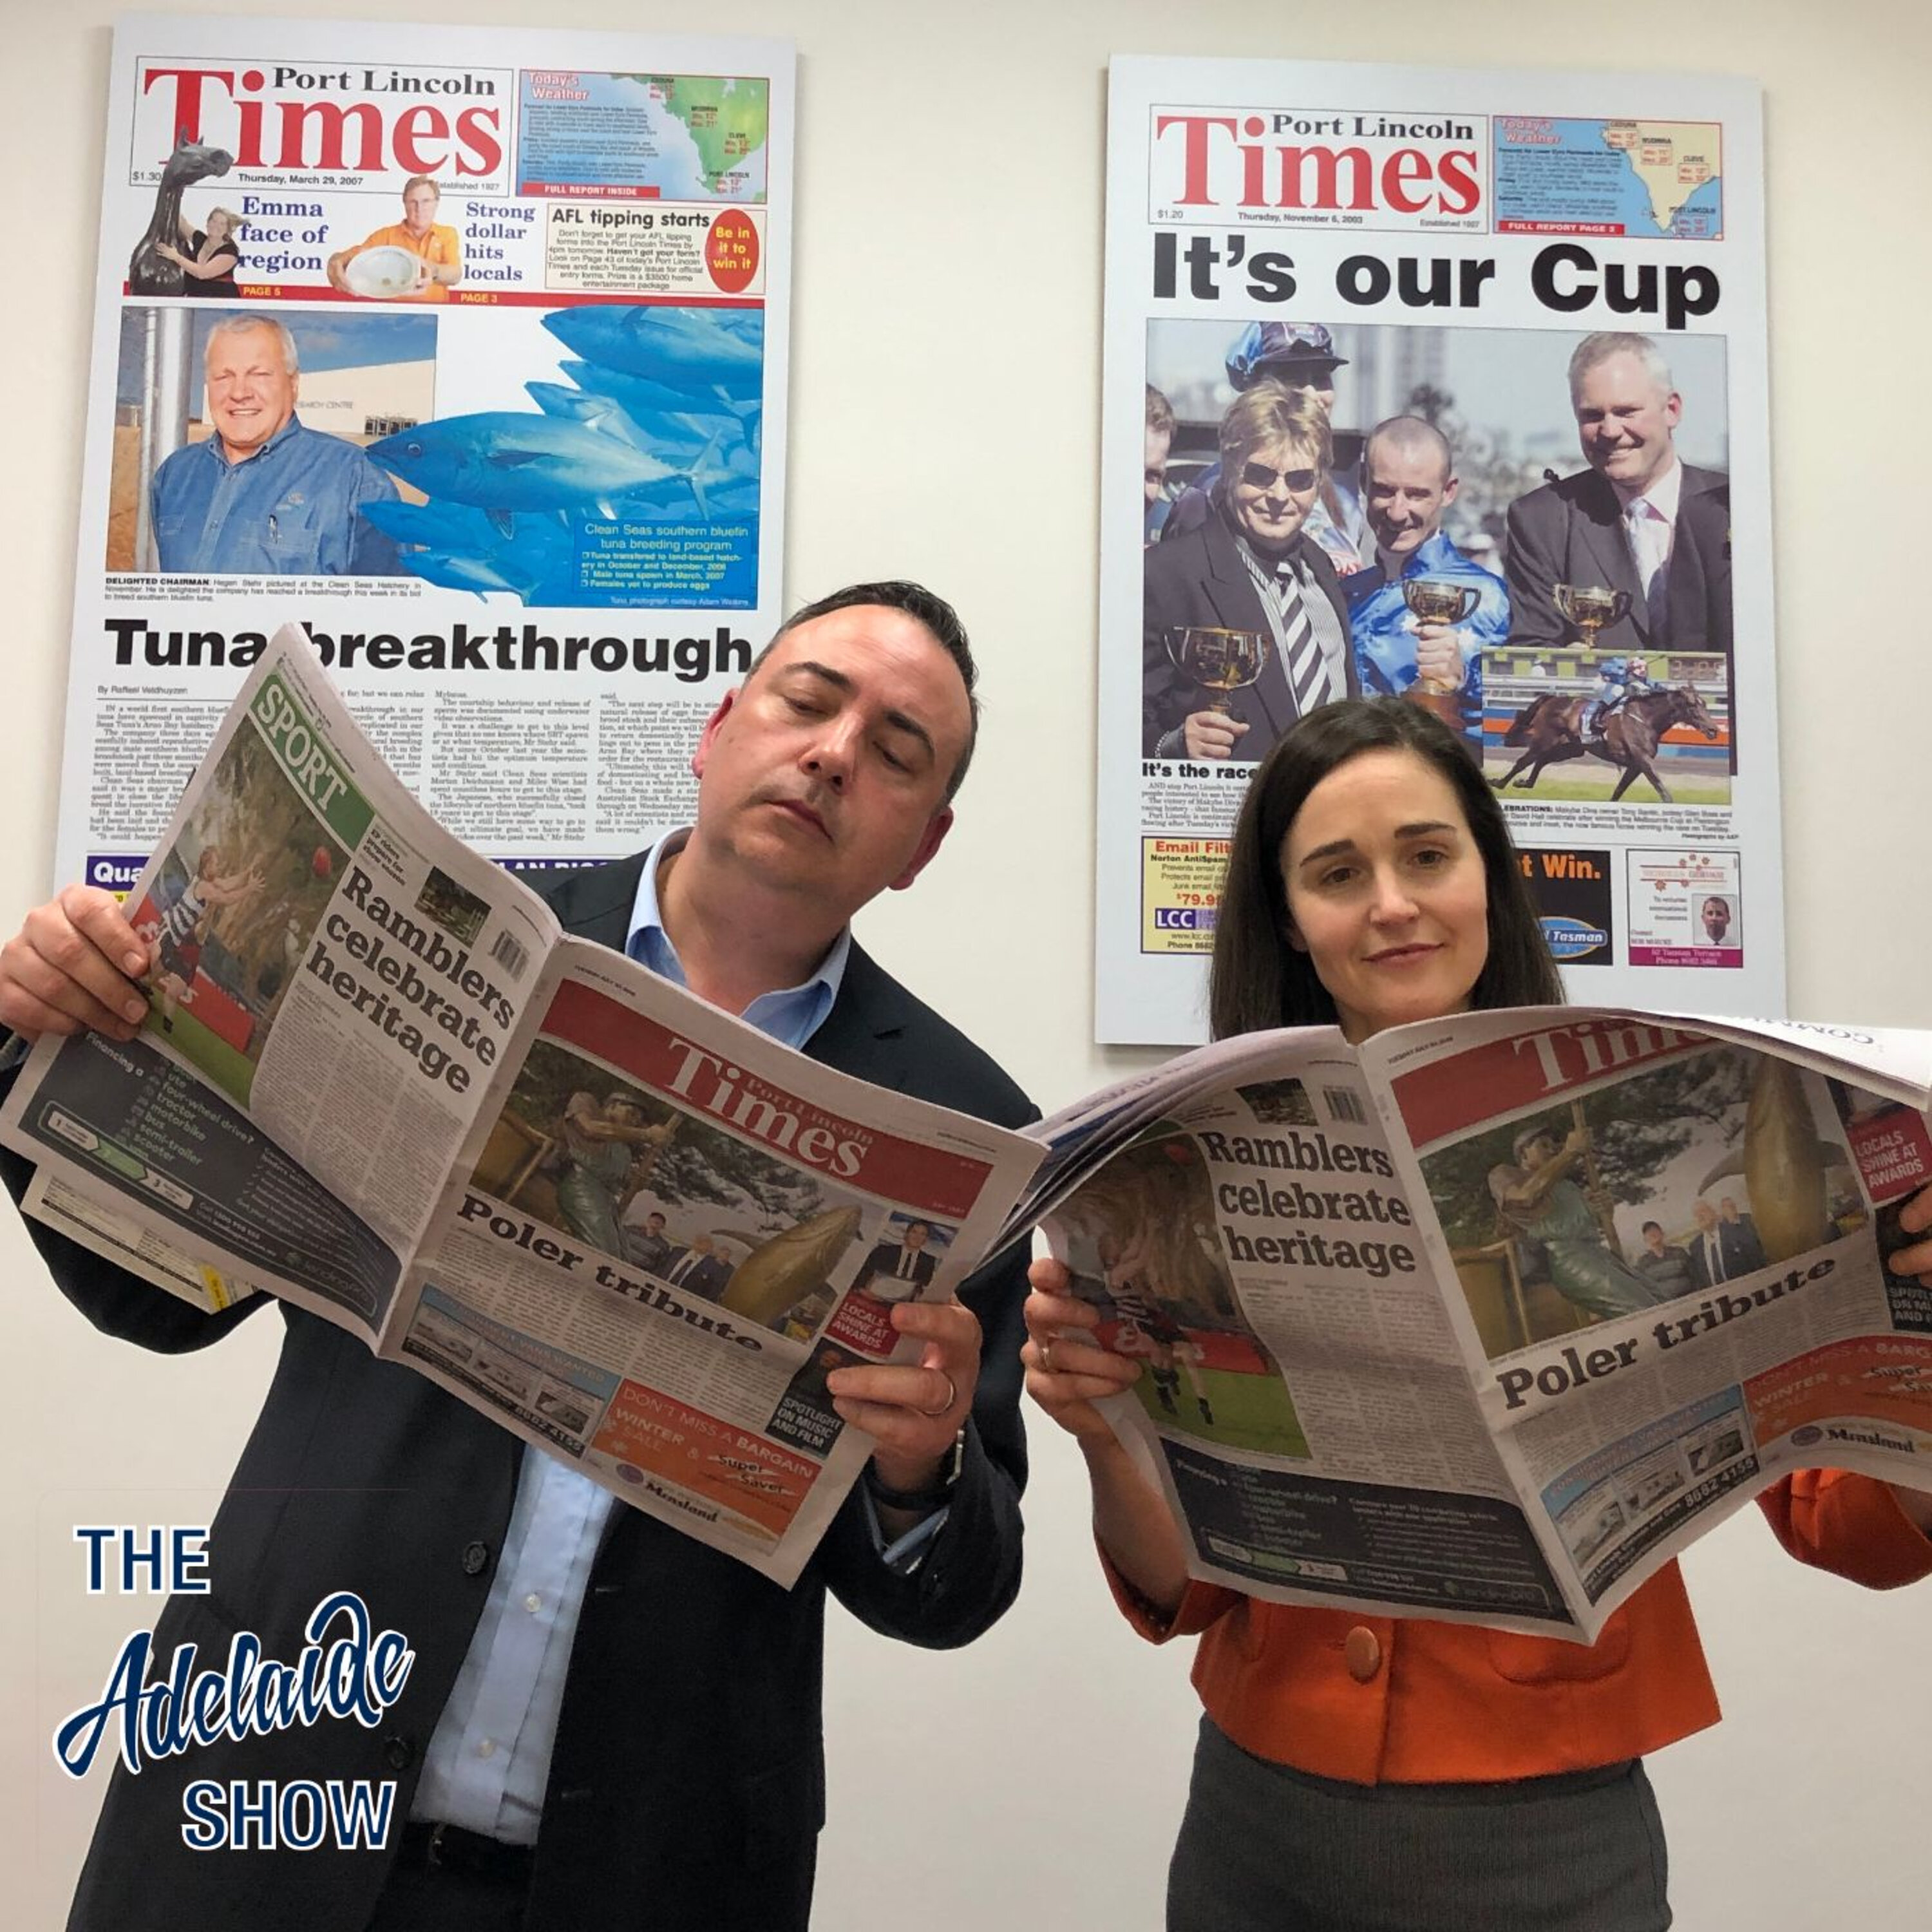 Read All About The Port Lincoln Times